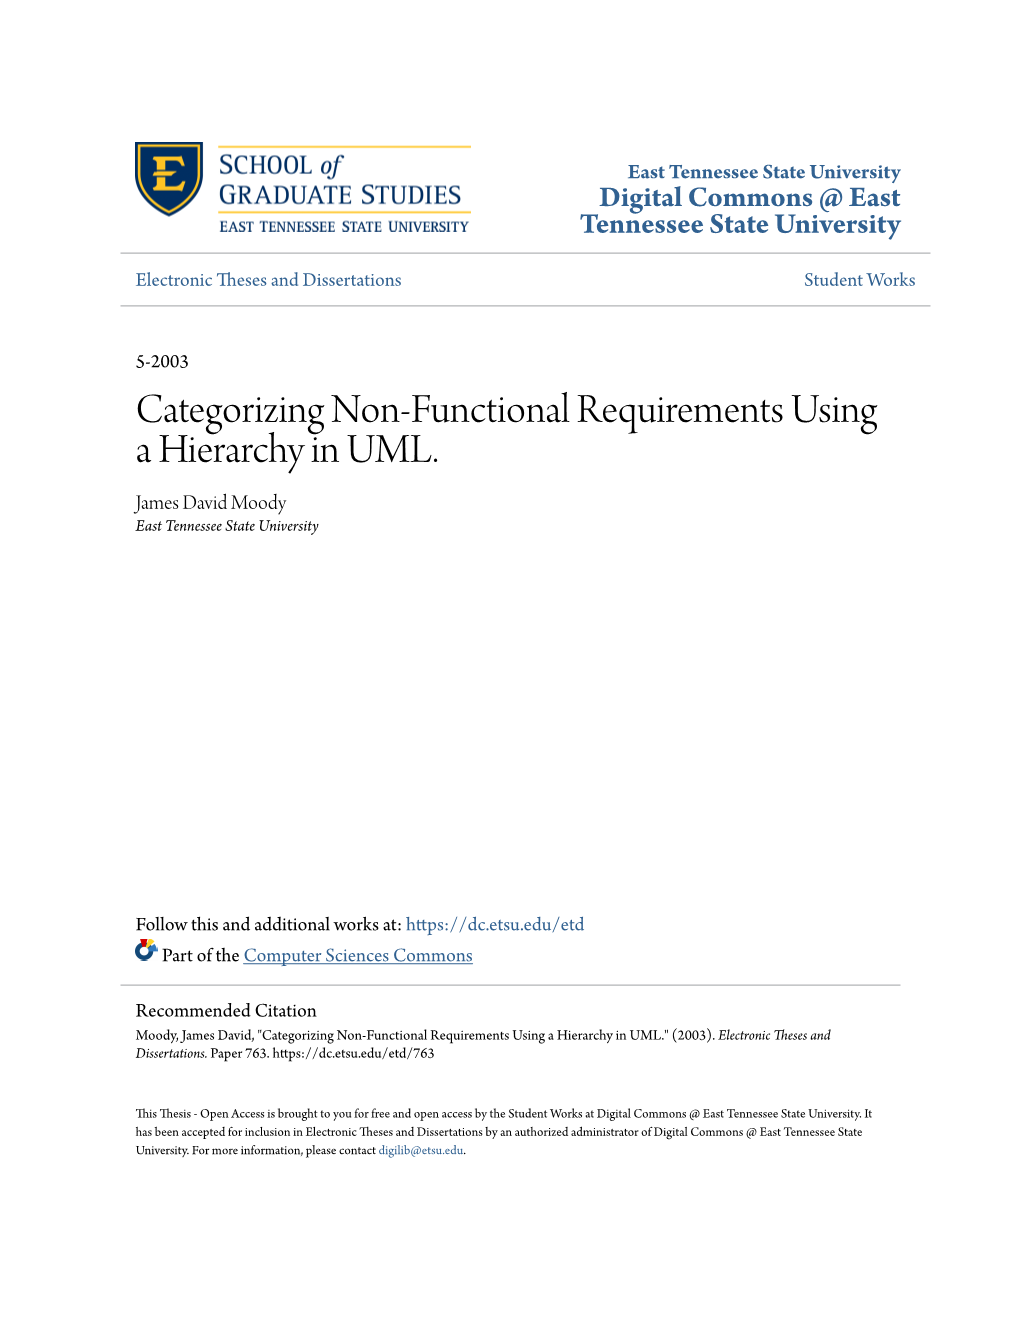 Categorizing Non-Functional Requirements Using a Hierarchy in UML. James David Moody East Tennessee State University